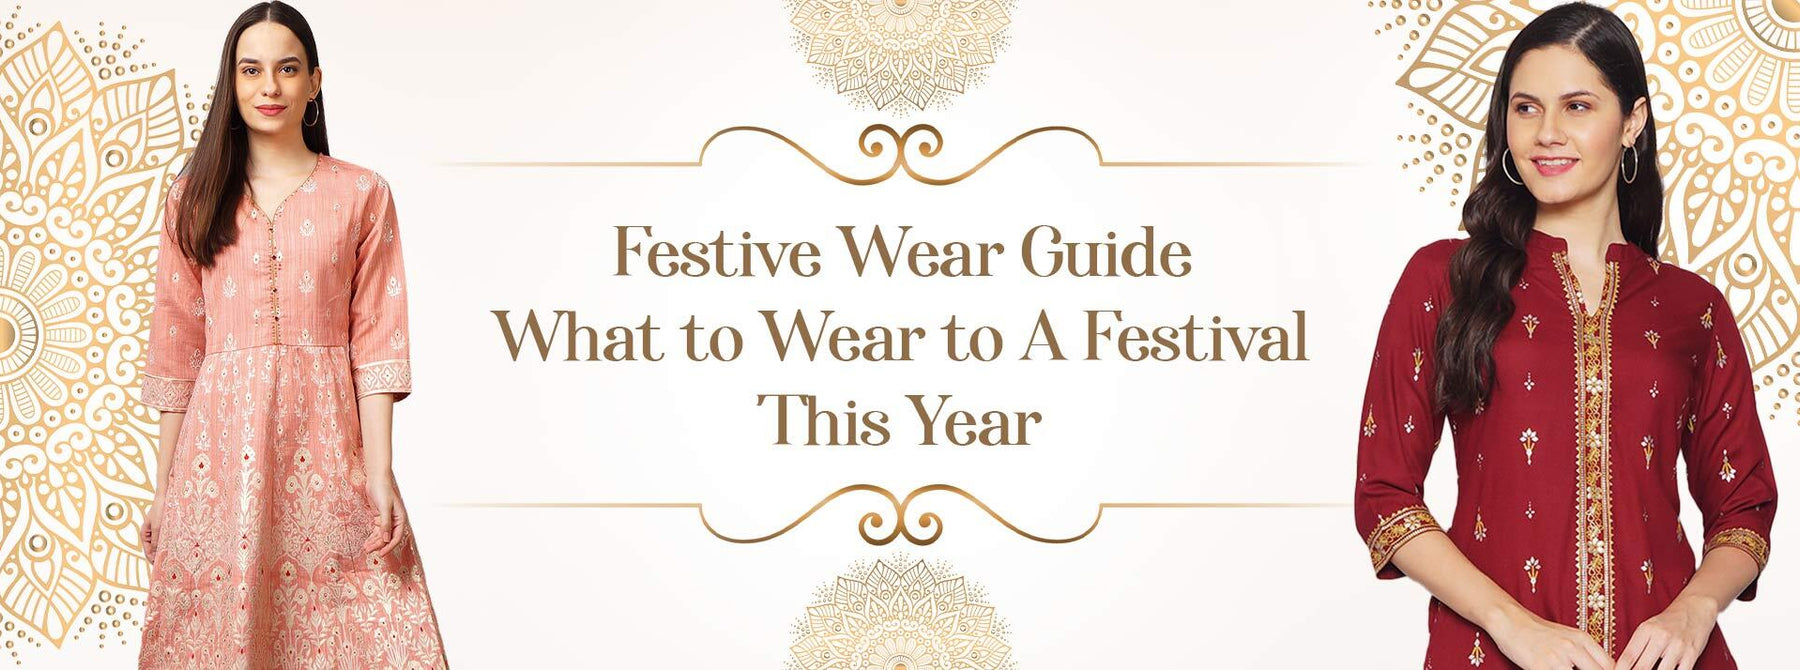 Festive Wear Guide- What to Wear to A Festival This Year